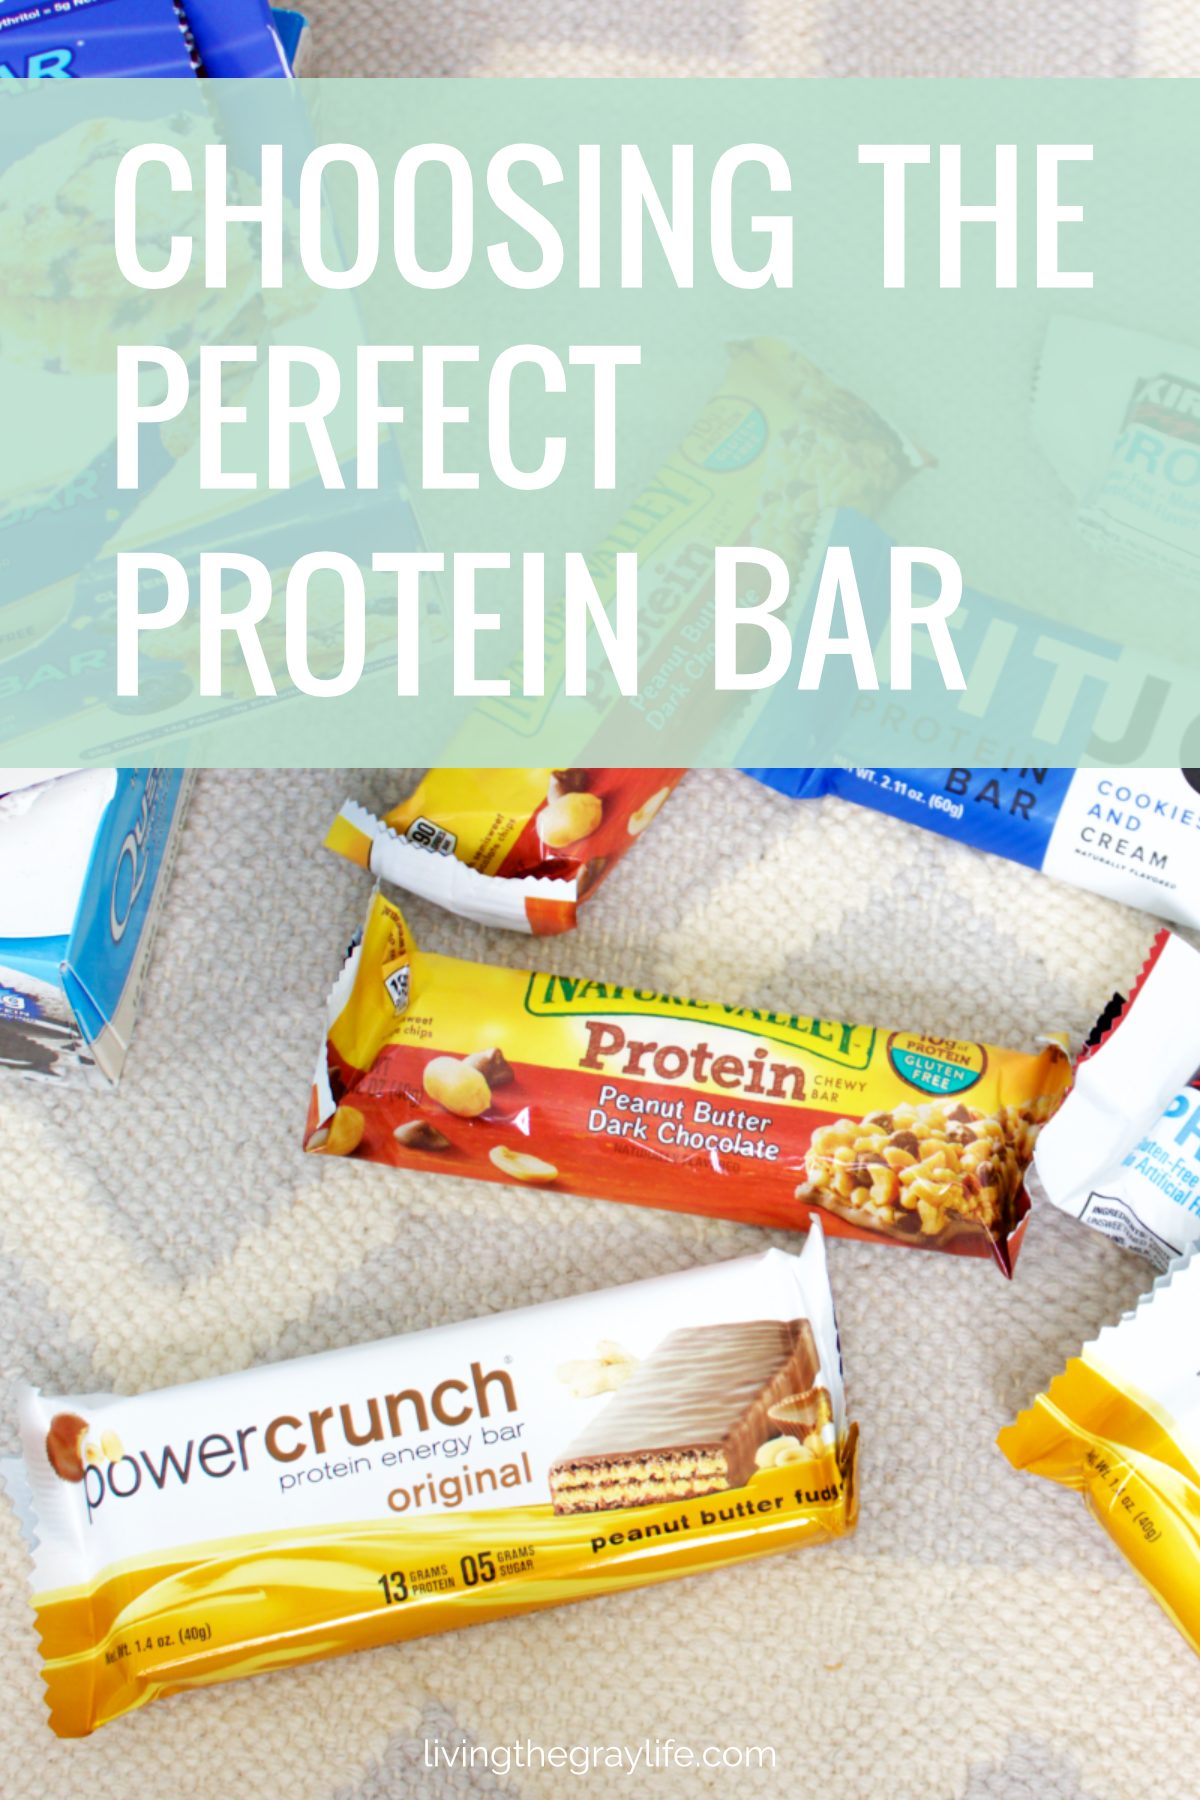 Some protein and granola bars are nutritionally identical to candy bars. Here's what to look for in a protein bar to really get the nutrients you need. 